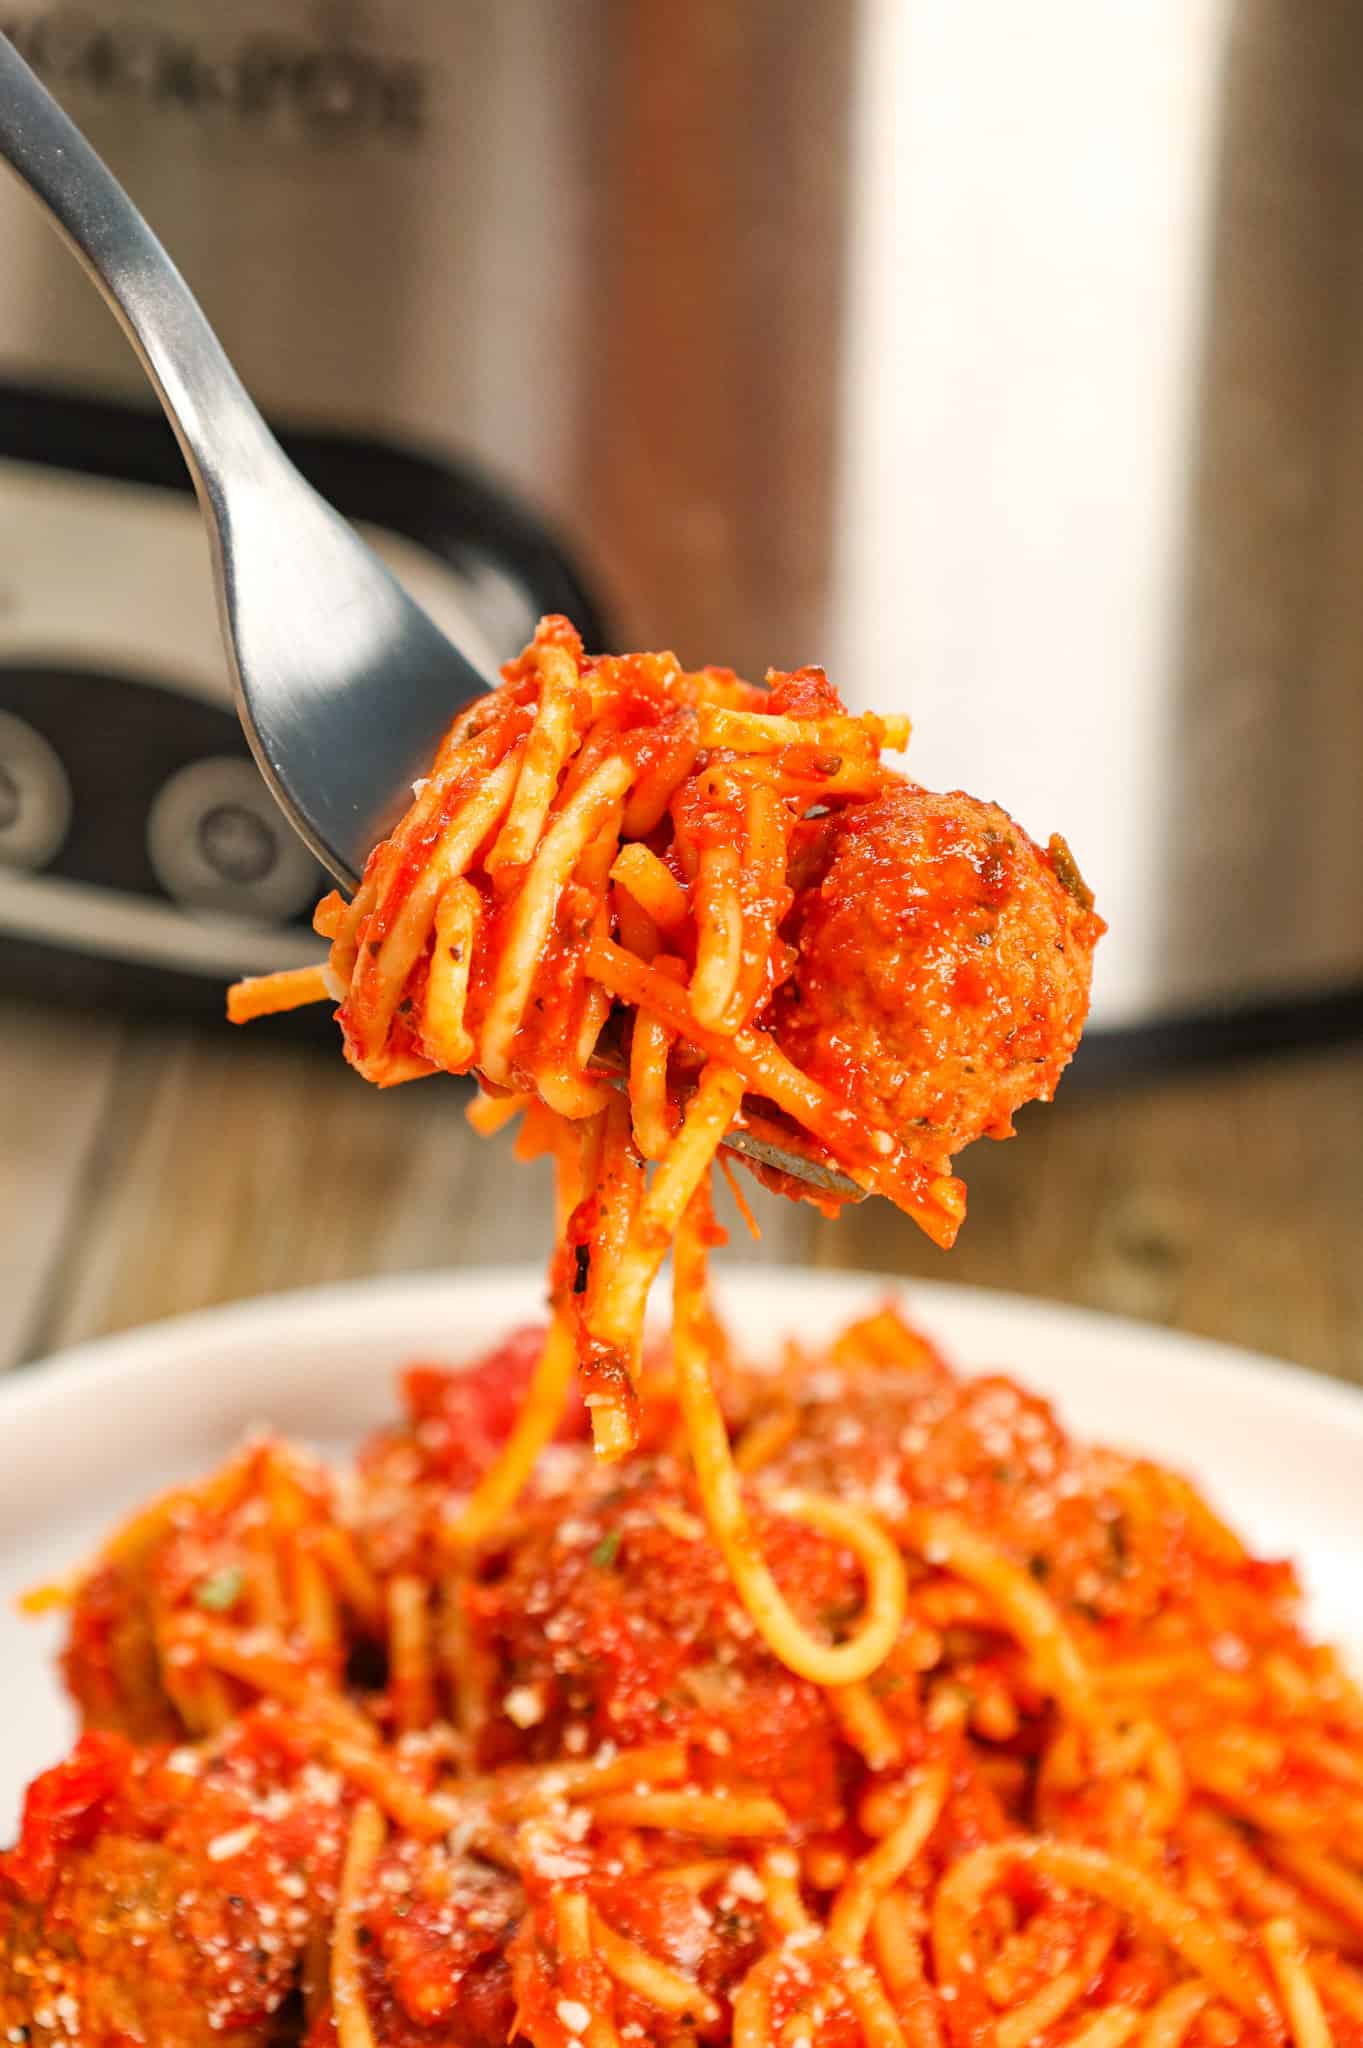 Crock Pot Spaghetti and Meatballs is an easy slow cooker dinner recipe made with frozen meatballs, marinara sauce, spaghetti and spices.